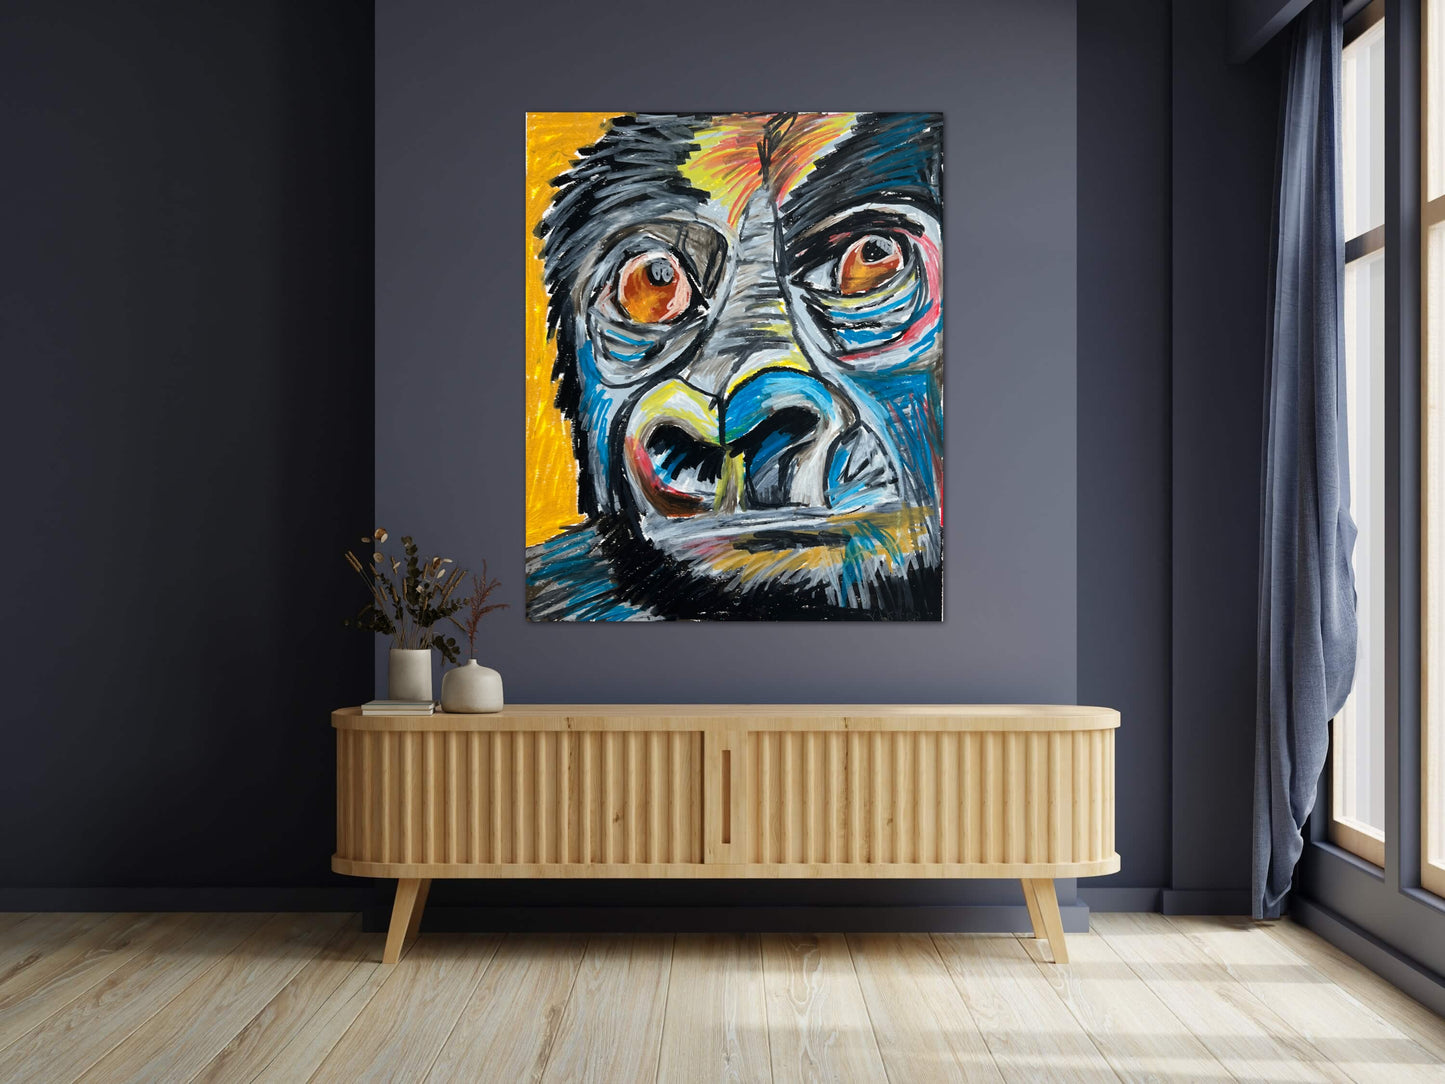 The Gorilla - fine prints and canvas prints in more size